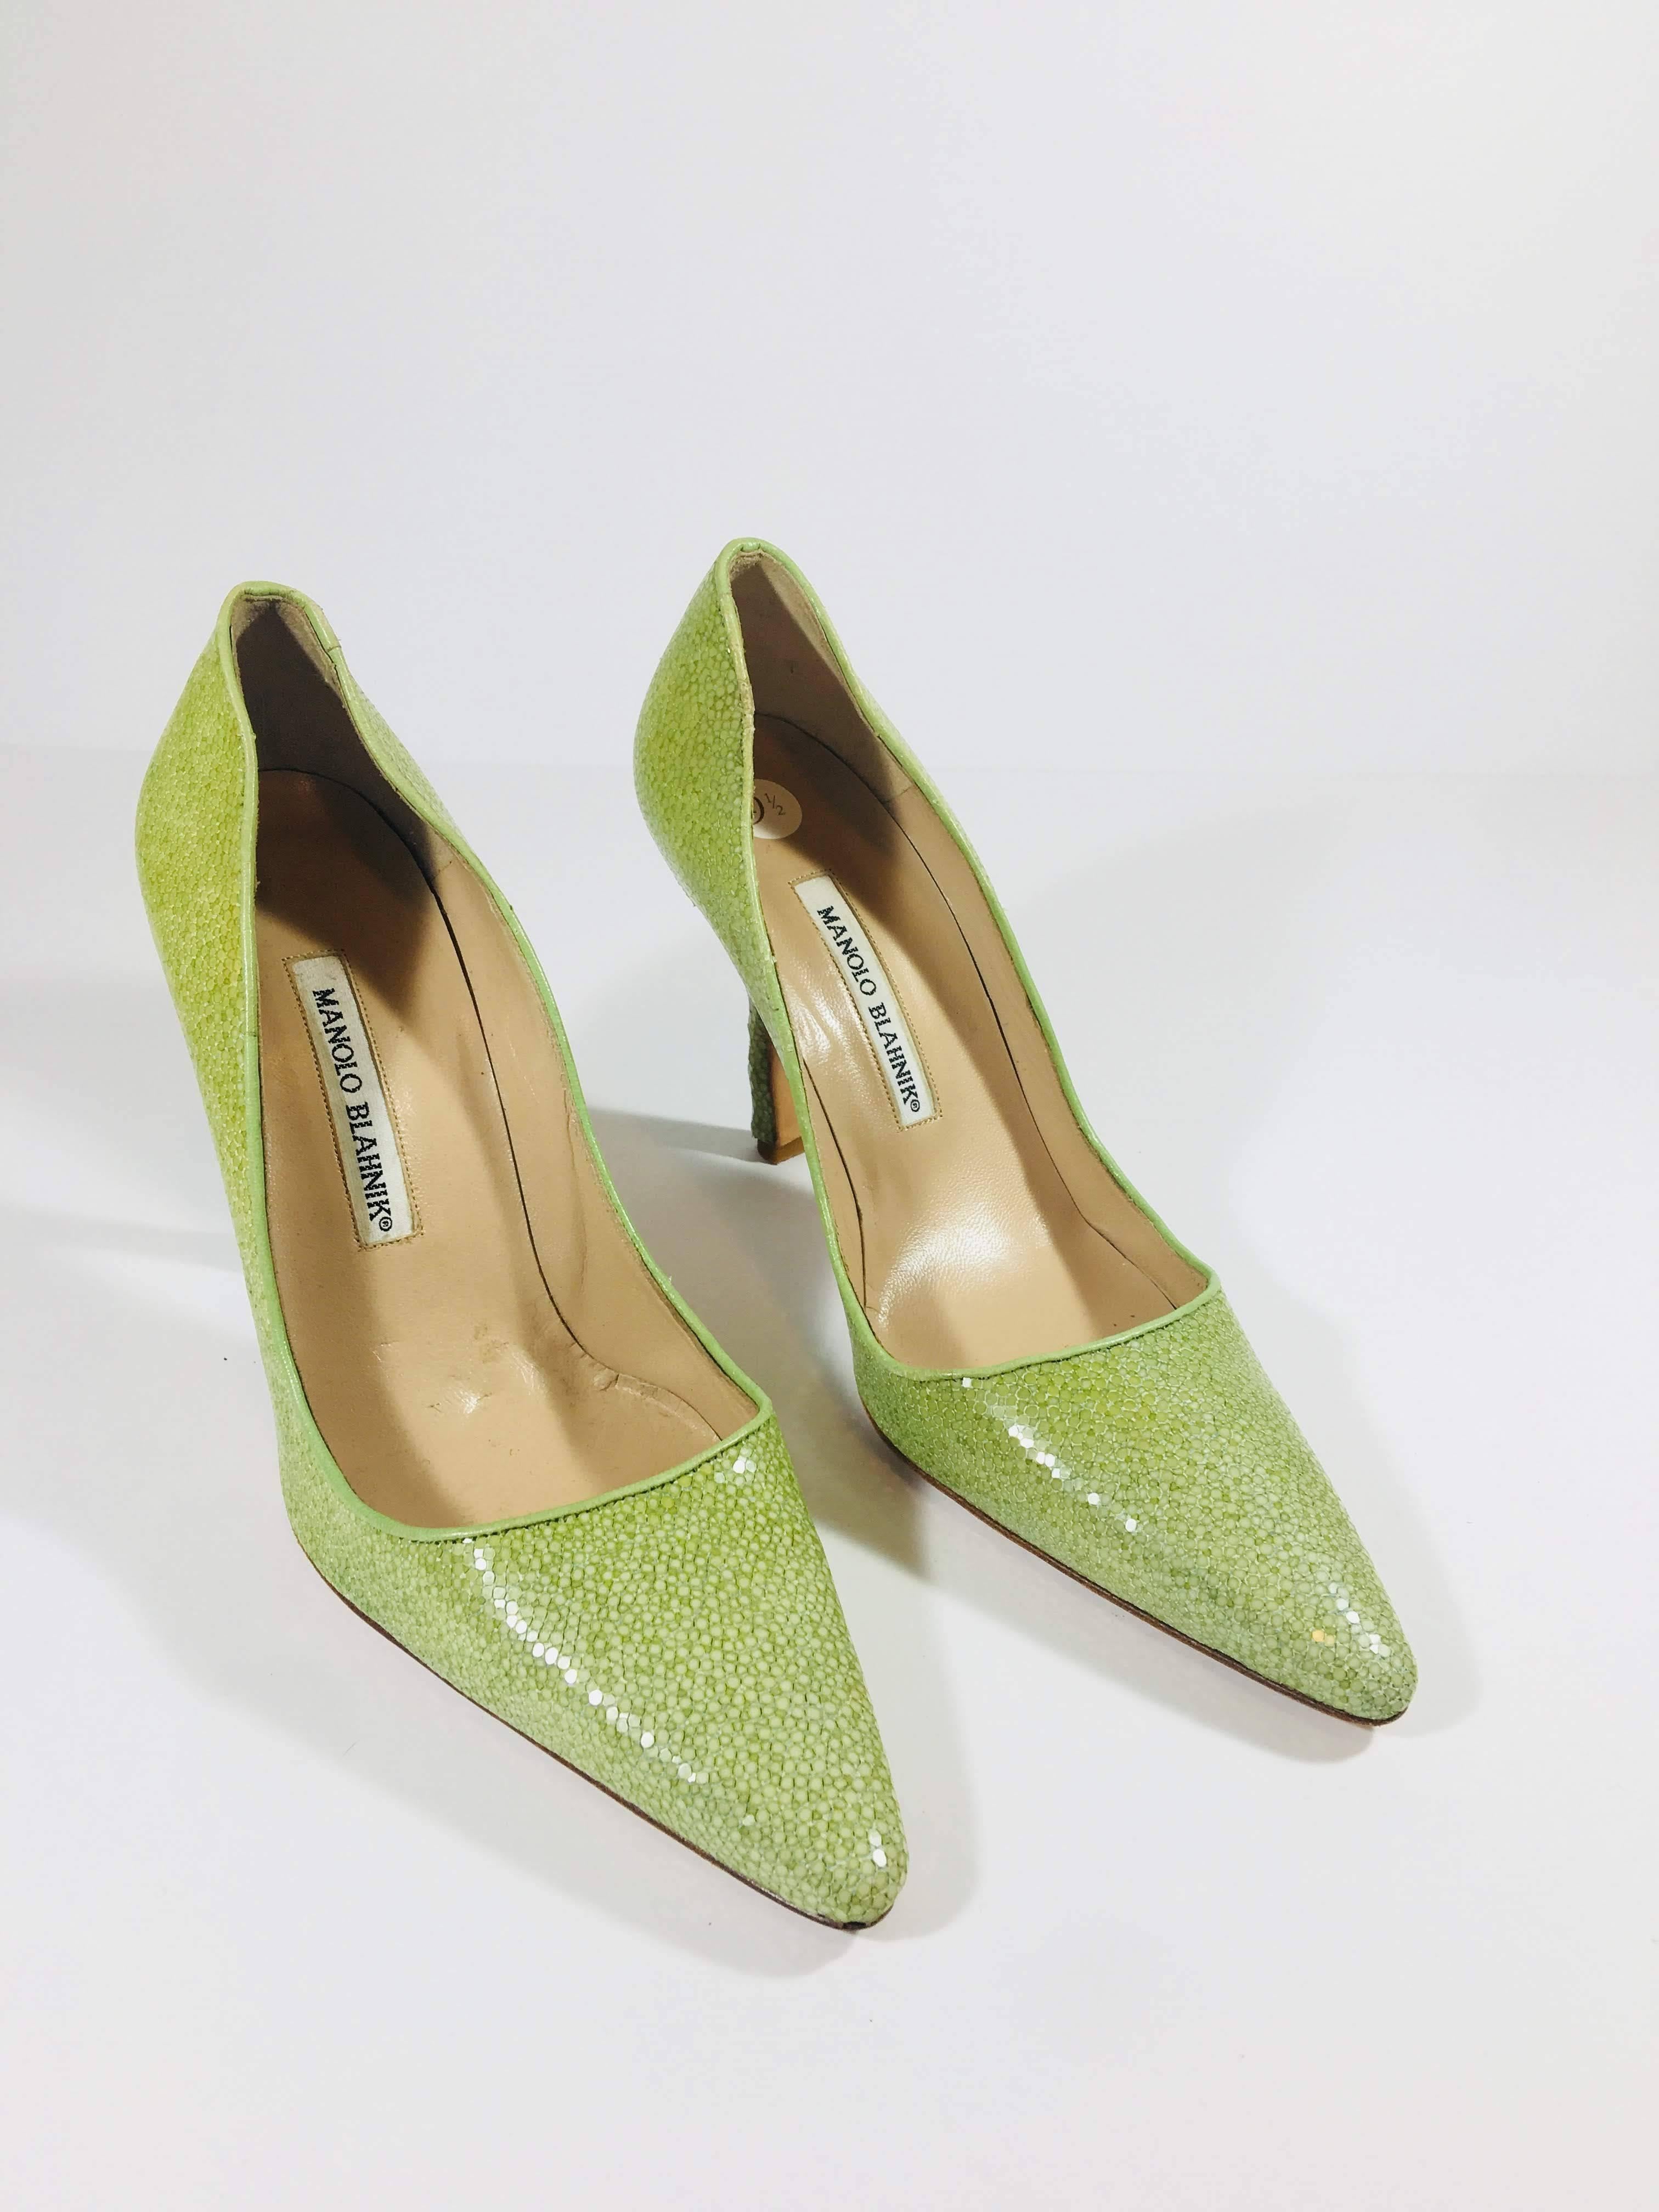 Manolo Blahnik Green Mosaic Print Leather Pumps with Stiletto Heel and Solid Green Piping.